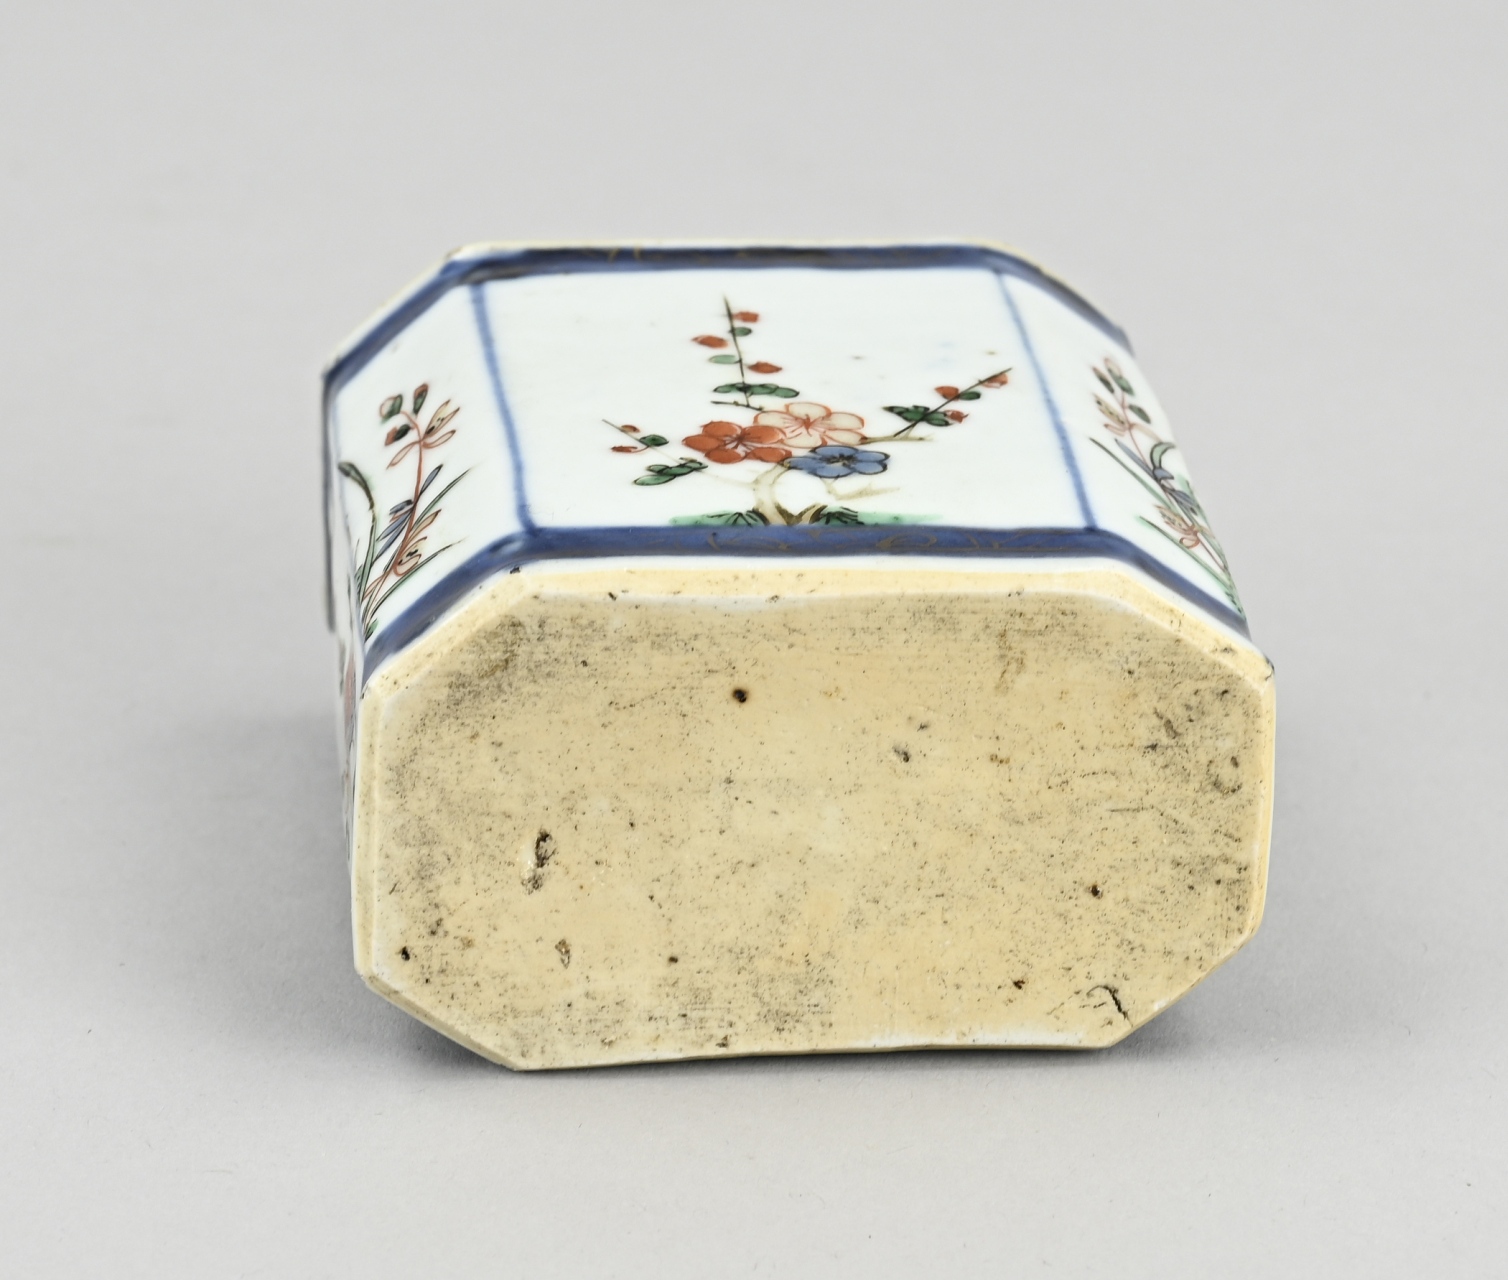 Chinese tea caddy, H 8.7 cm. - Image 2 of 2